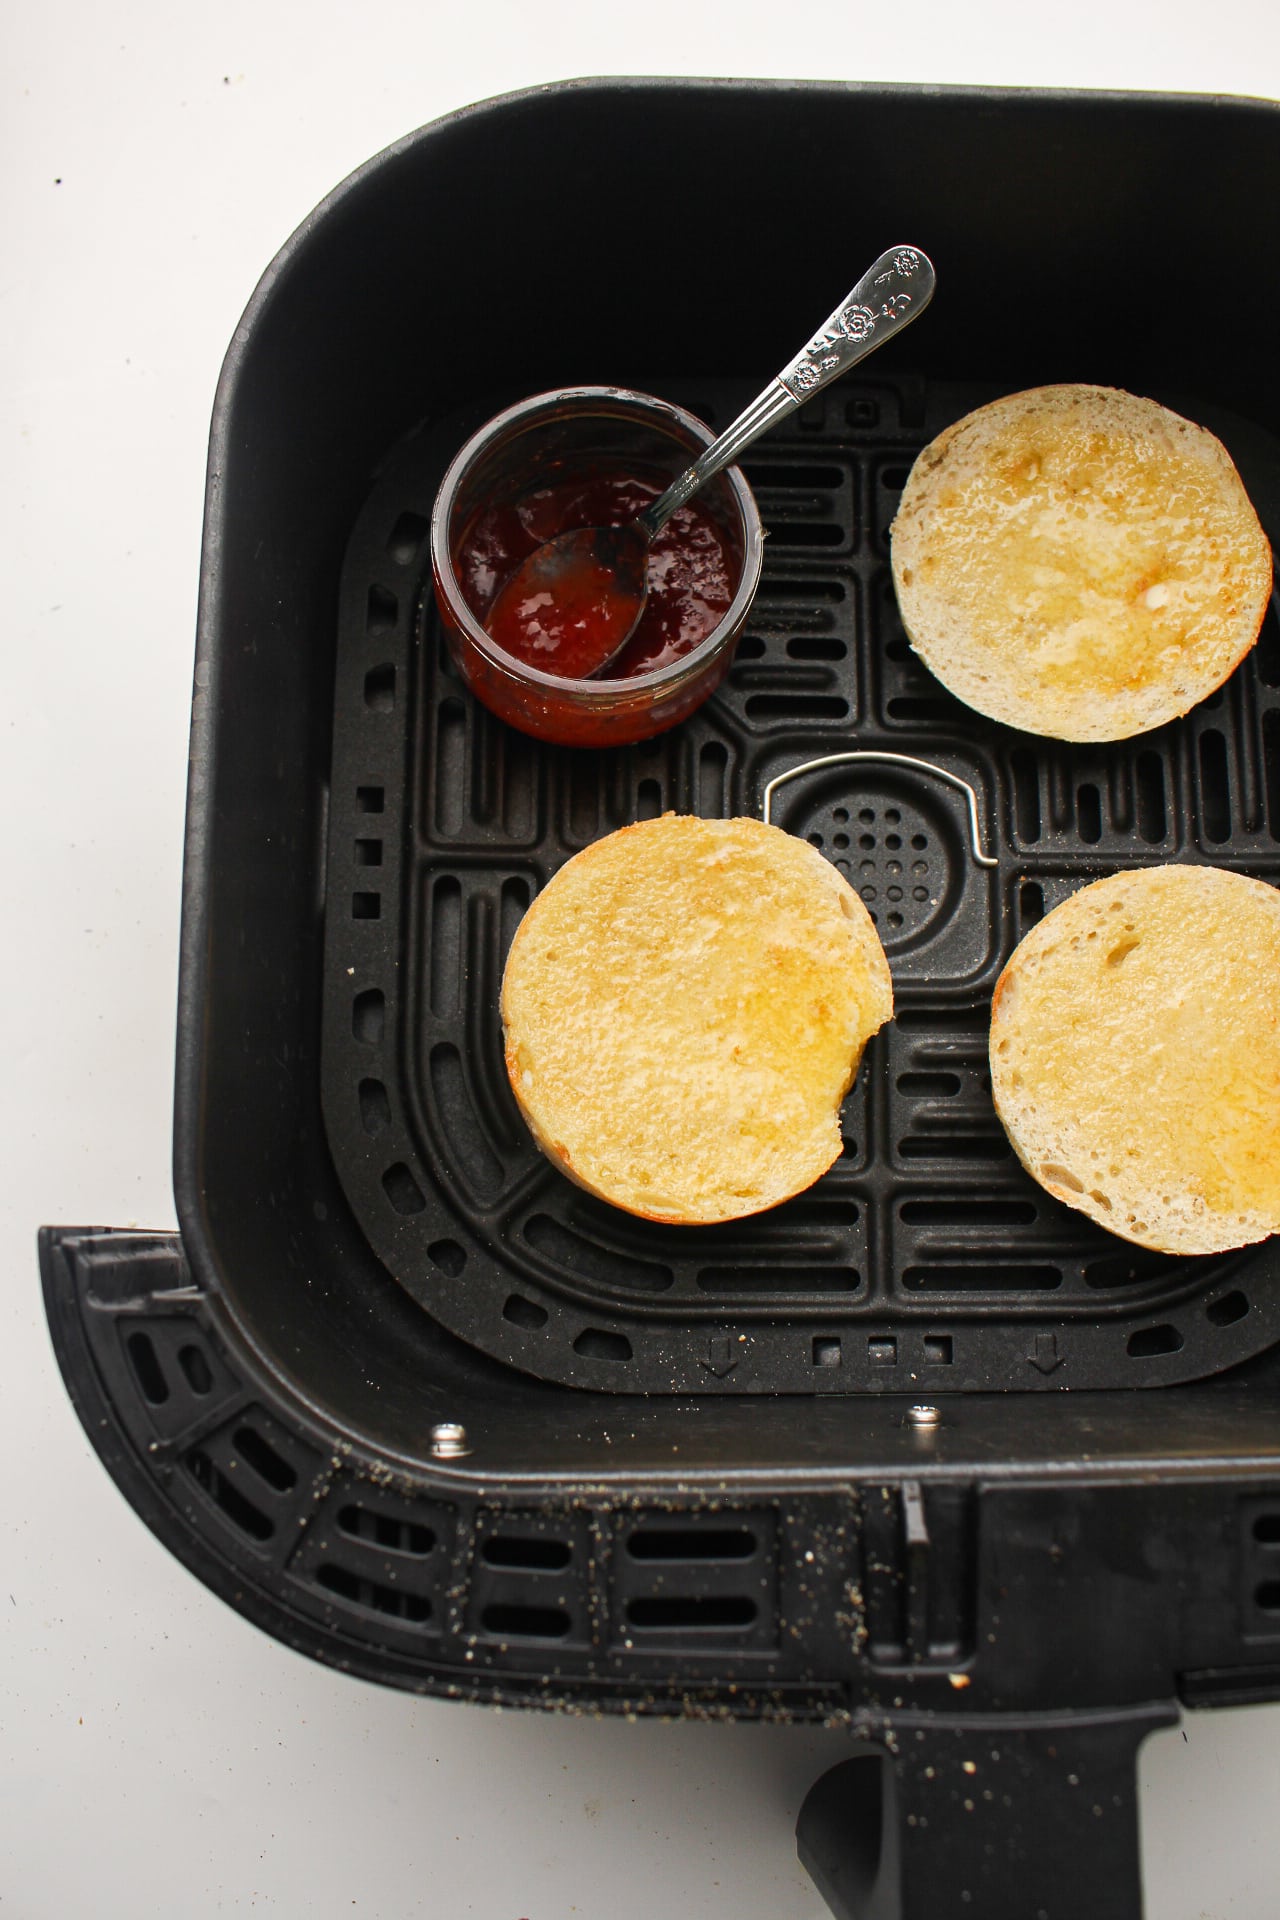 How to toast English muffins in the air fryer
